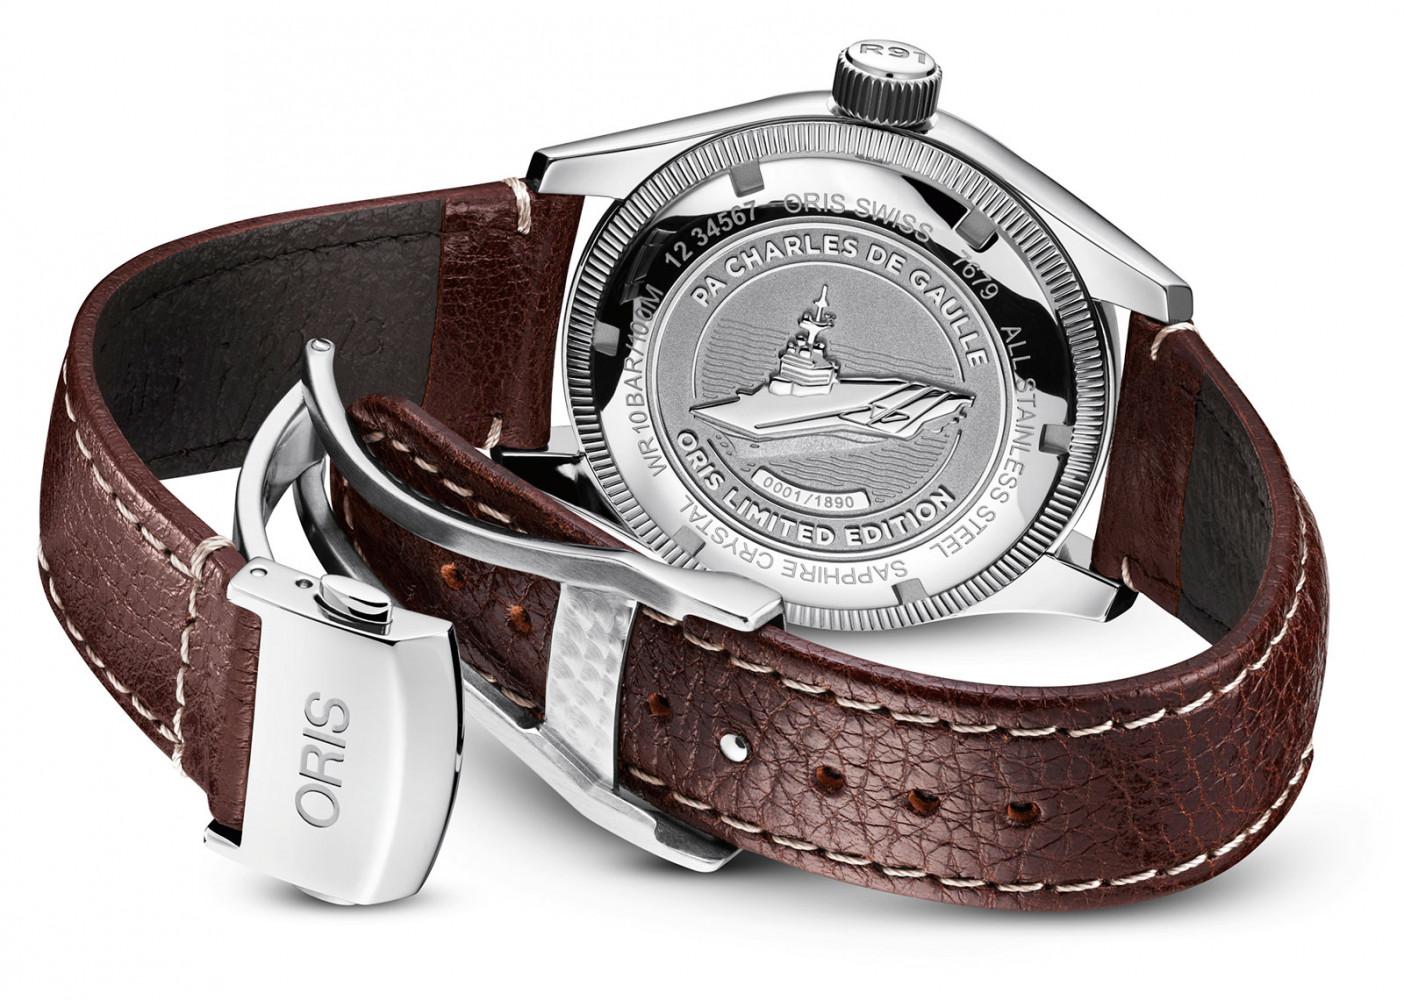 The PA Charles de Gaulle Oris Limited Edition